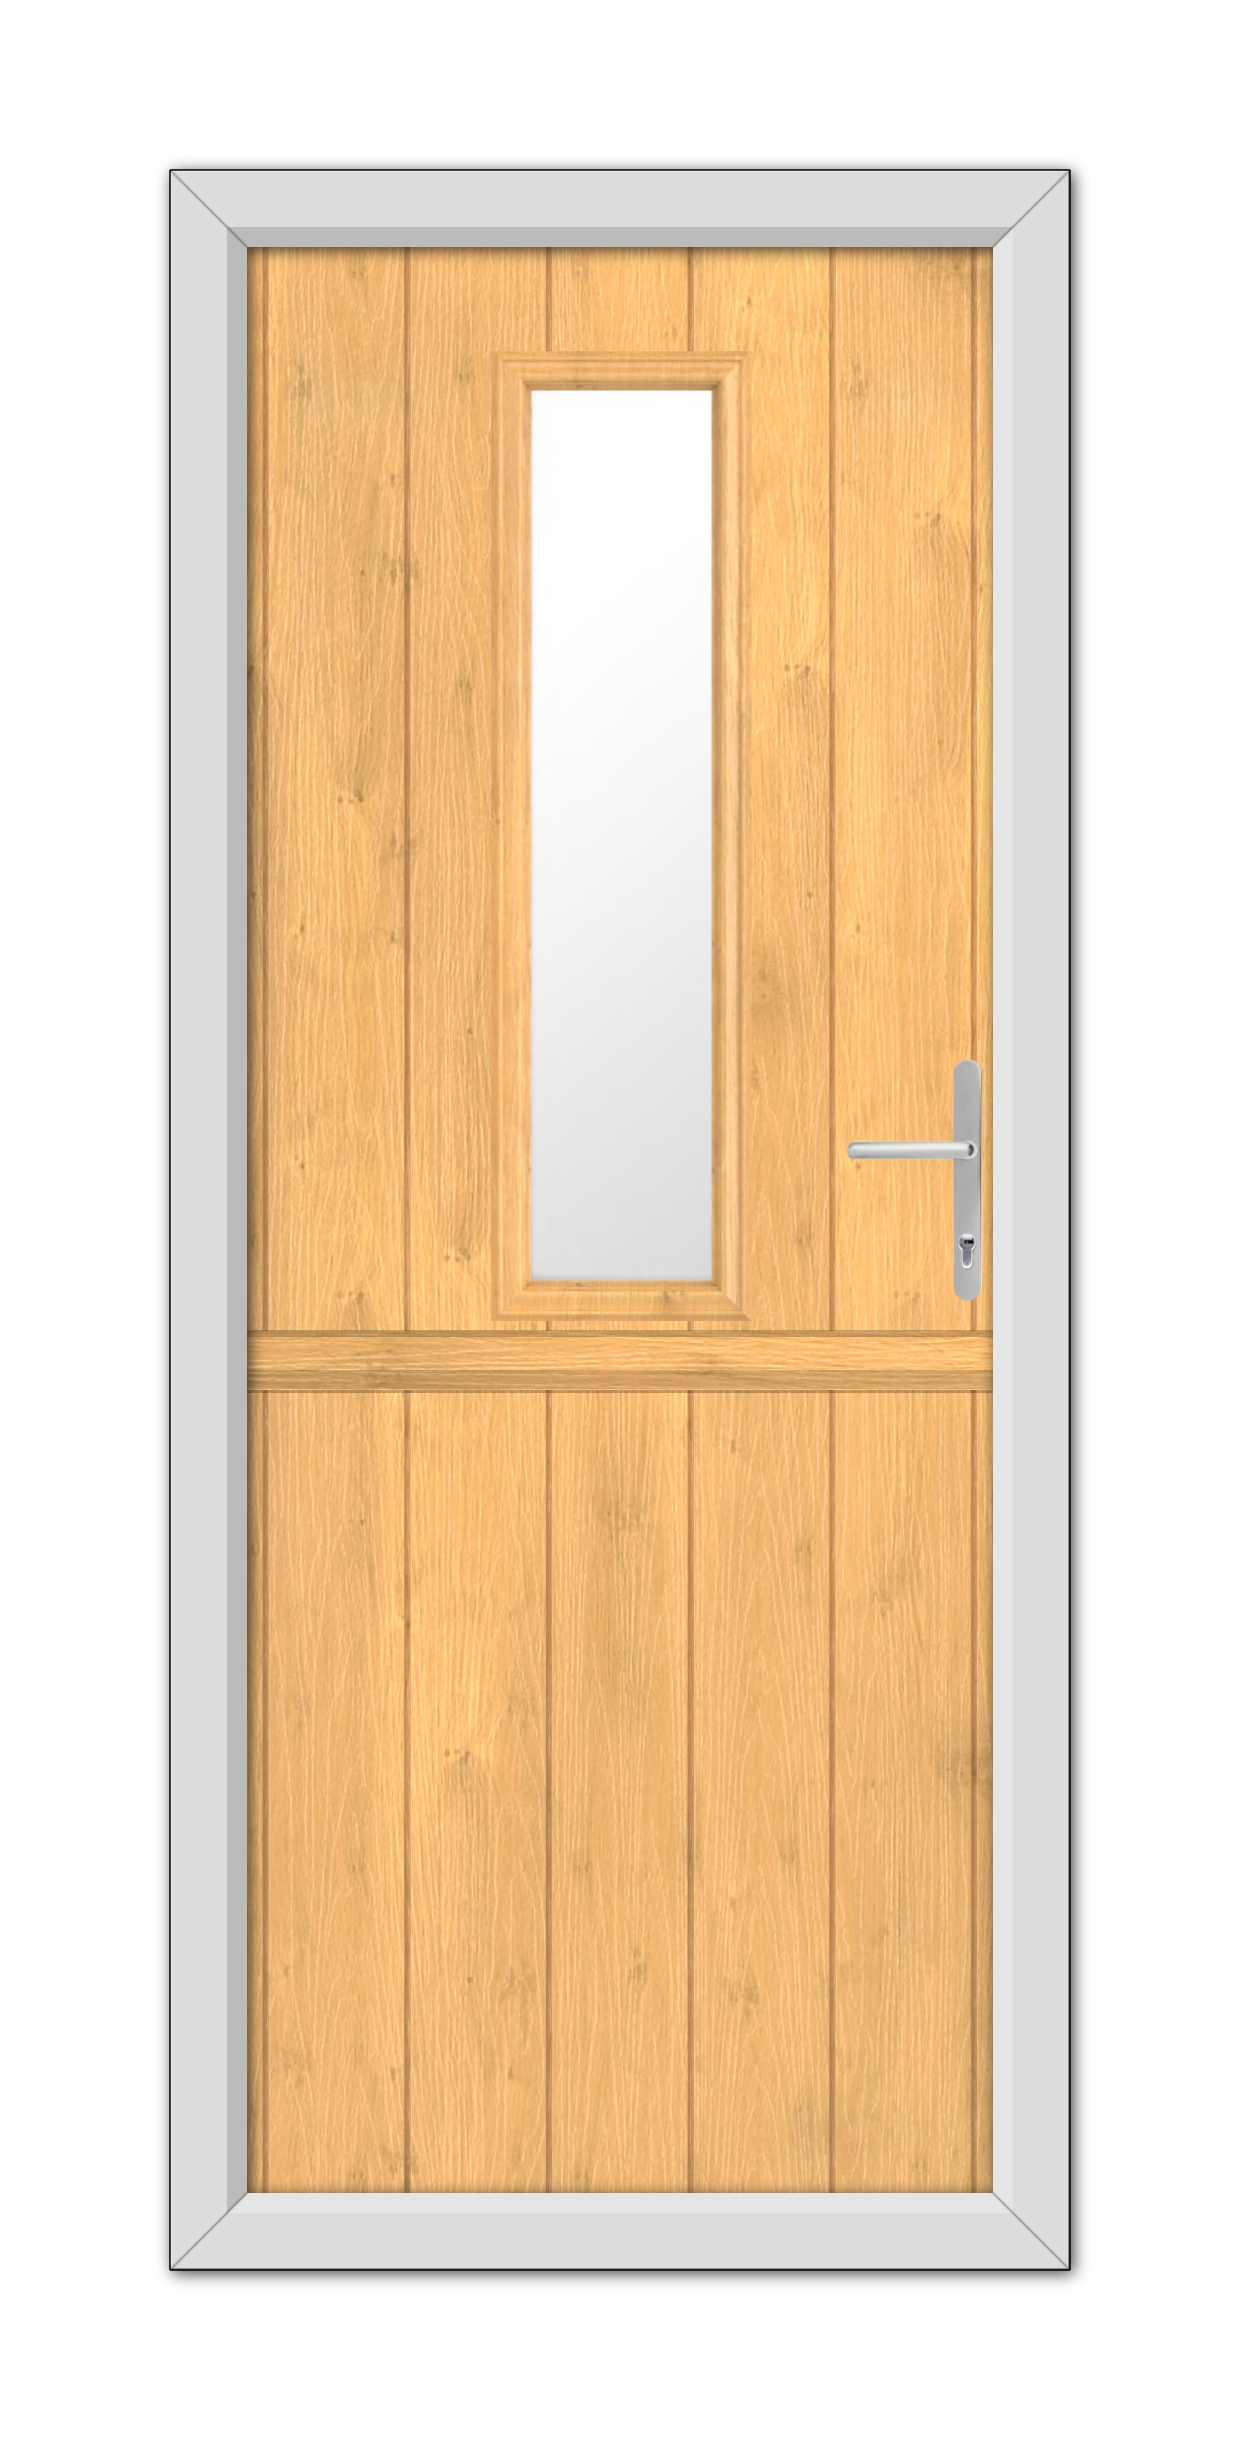 A Irish Oak Mowbray Stable Composite Door 48mm Timber Core with a small rectangular window and a metal handle, framed by a gray border, viewed head-on.